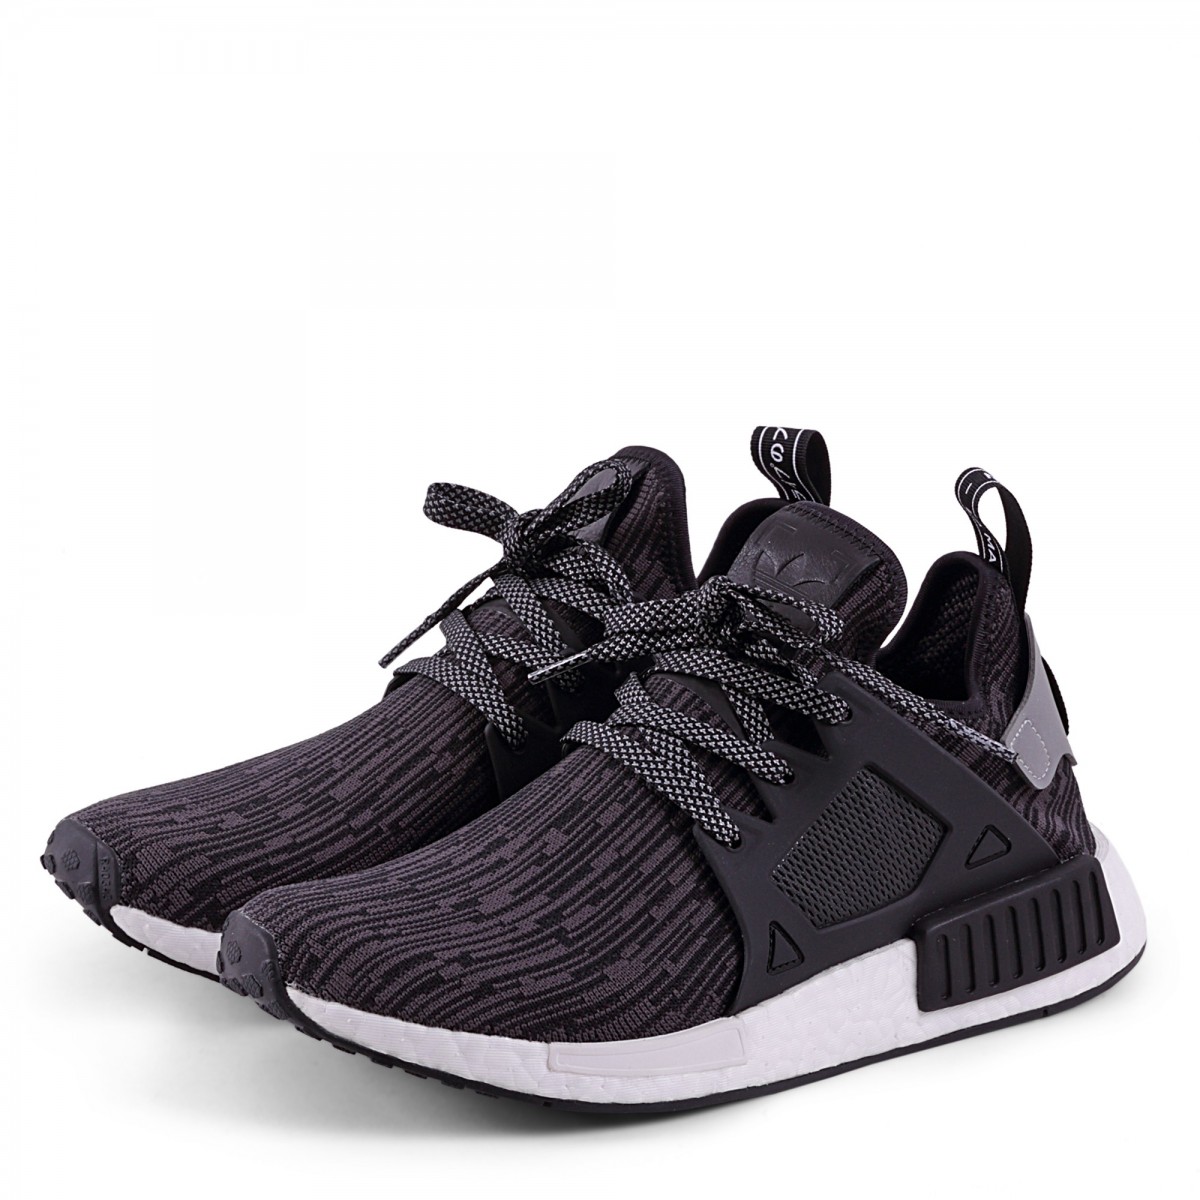 NMD_XR1 S77195